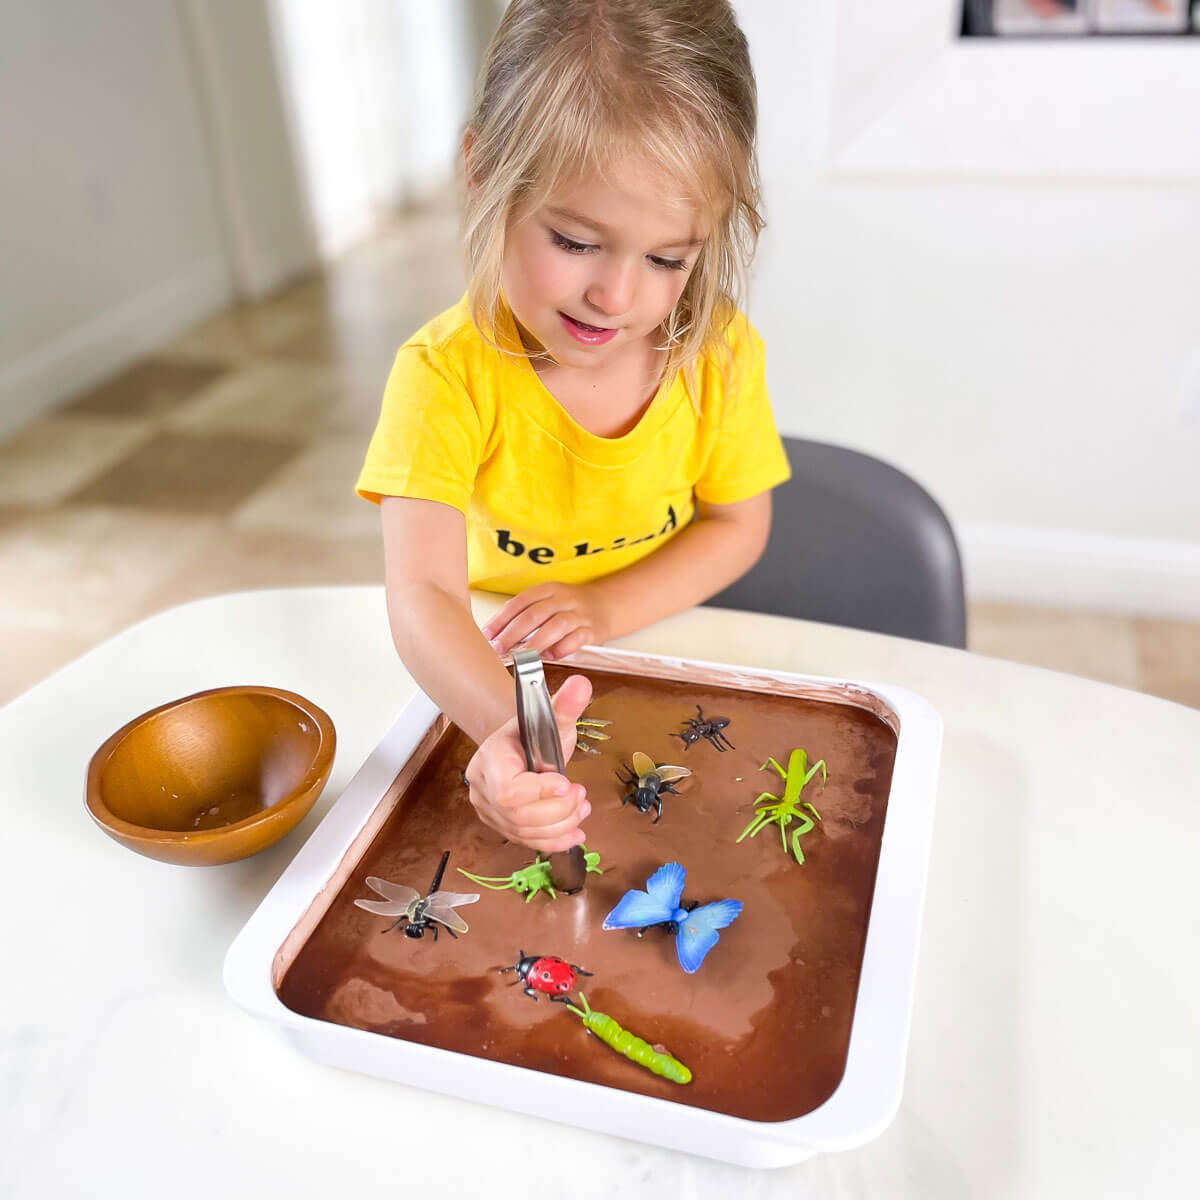 How to Make Mud for Play – Taste Safe Oobleck